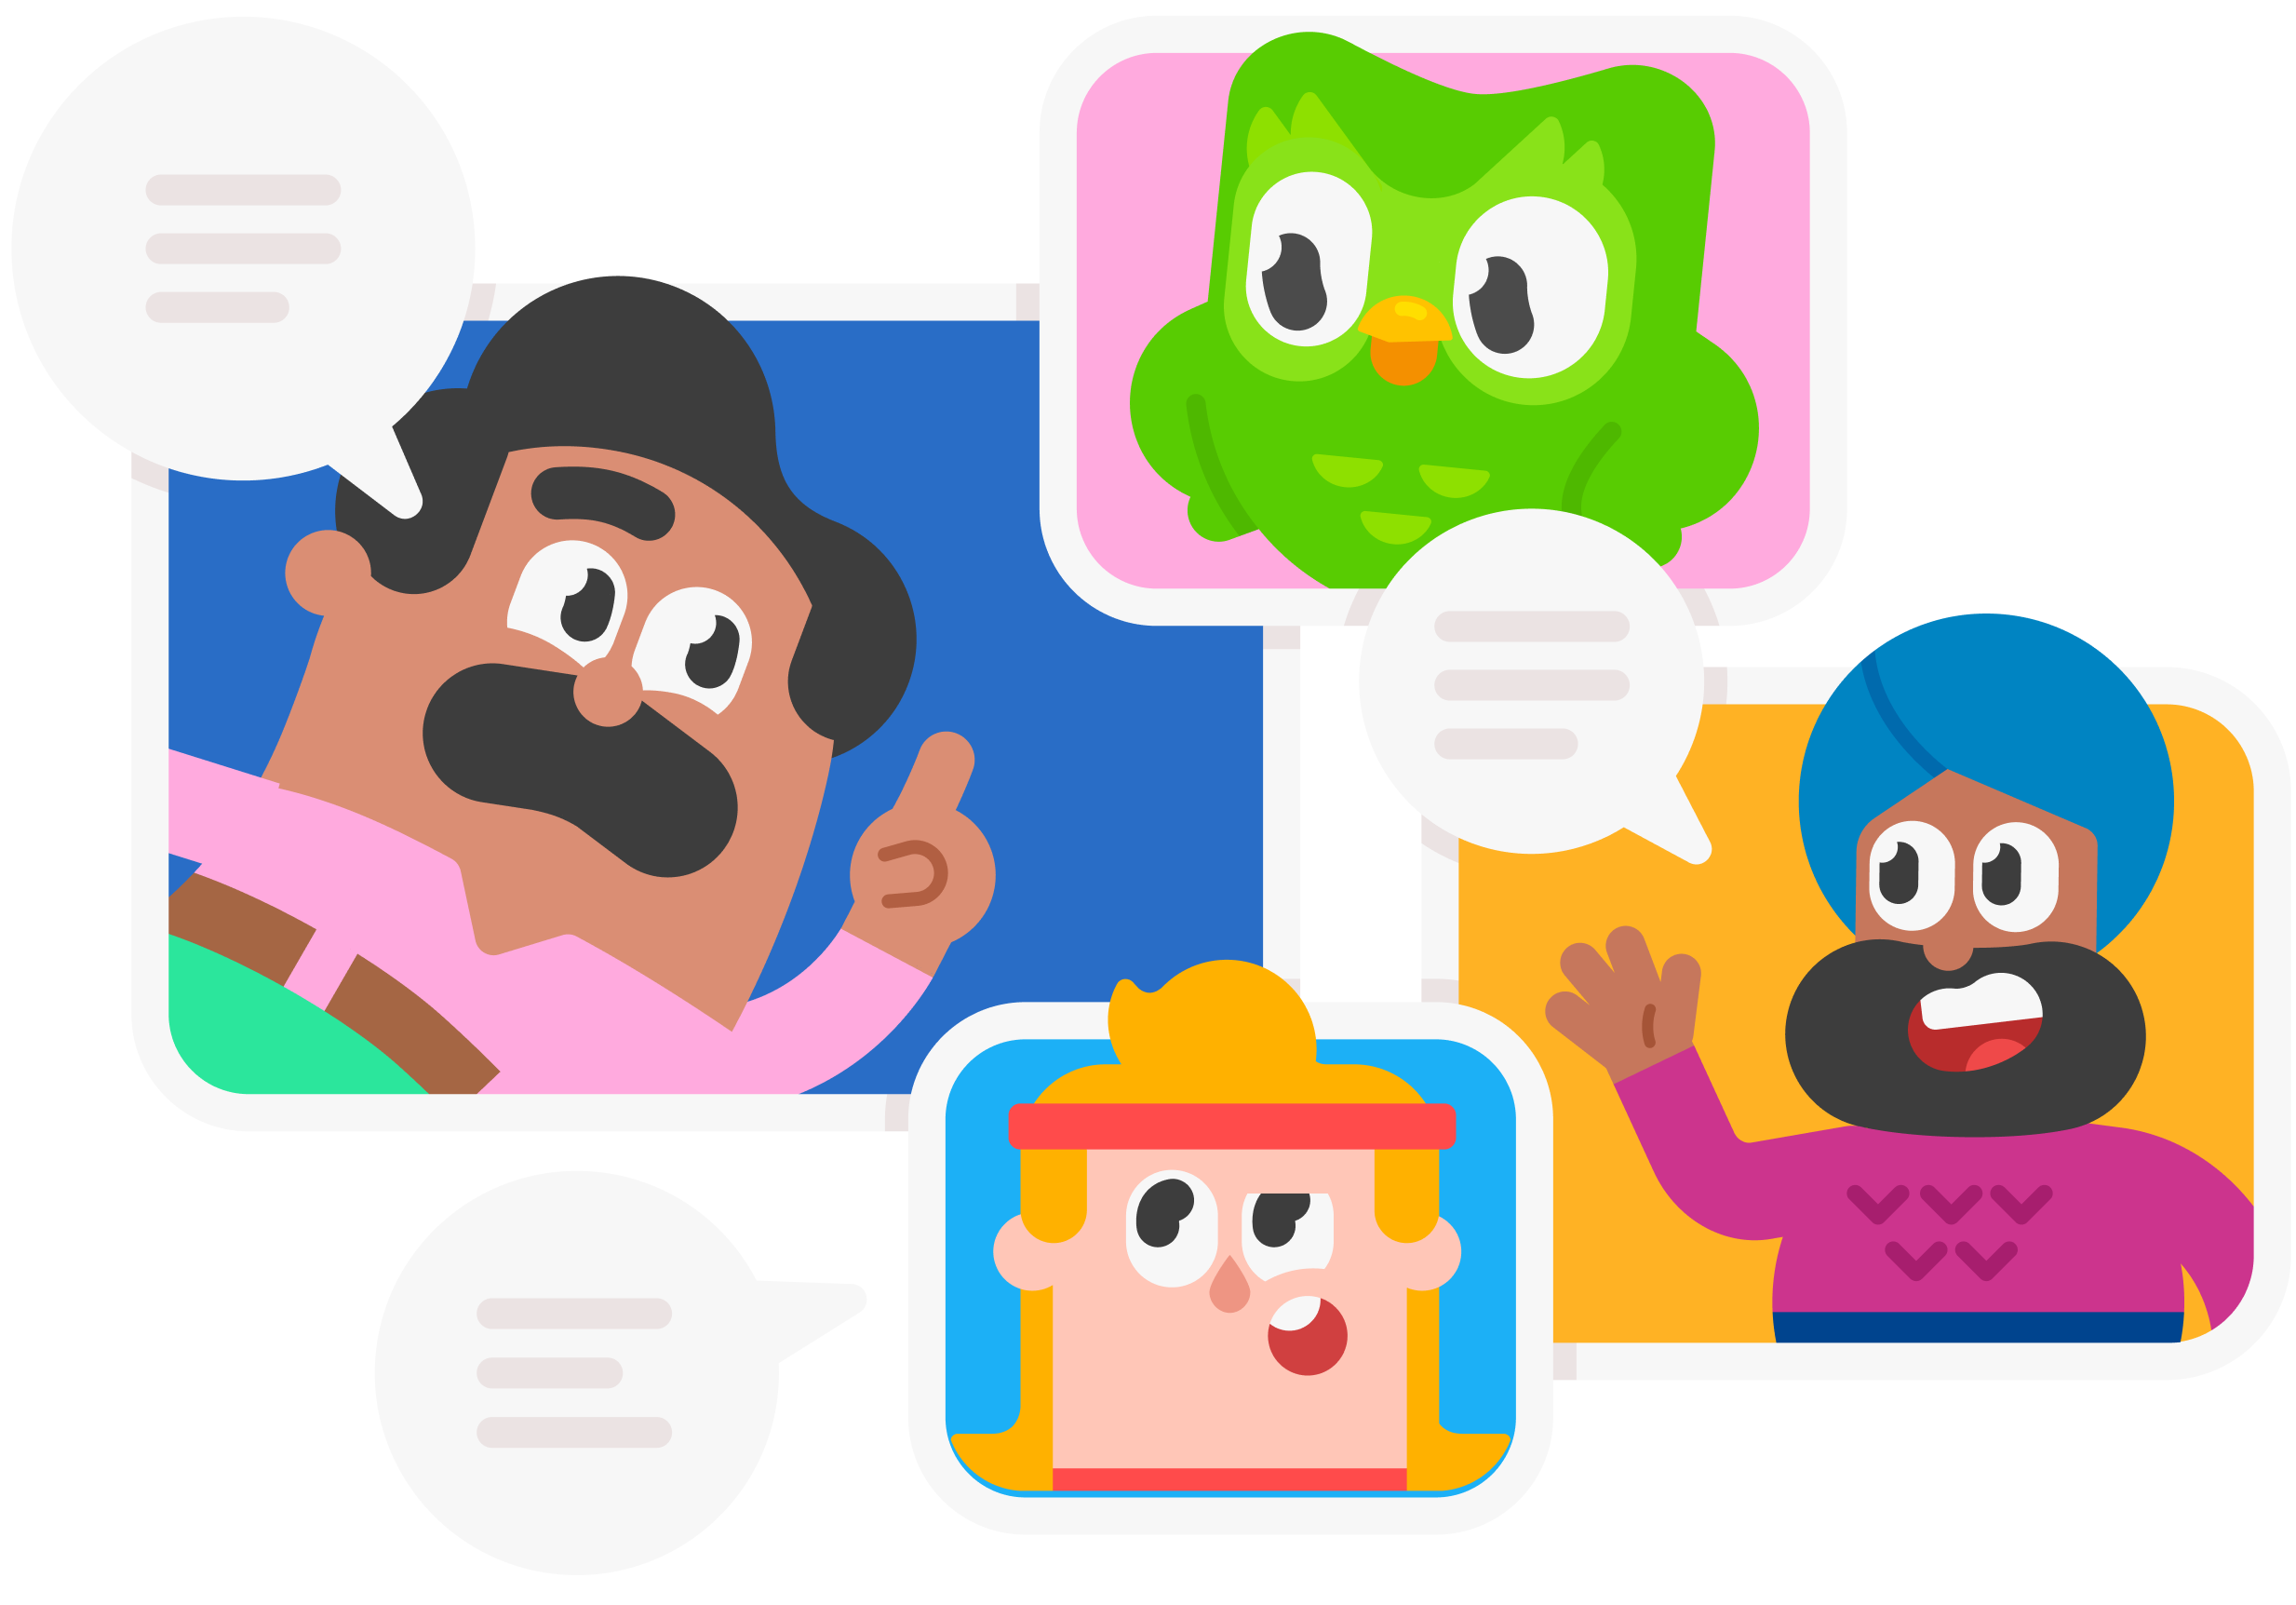 Duolingo characters in small boxes, each with a speech bubble to signal talking. Clockwise from top is: Duo, Vikram, Eddy, and Oscar.